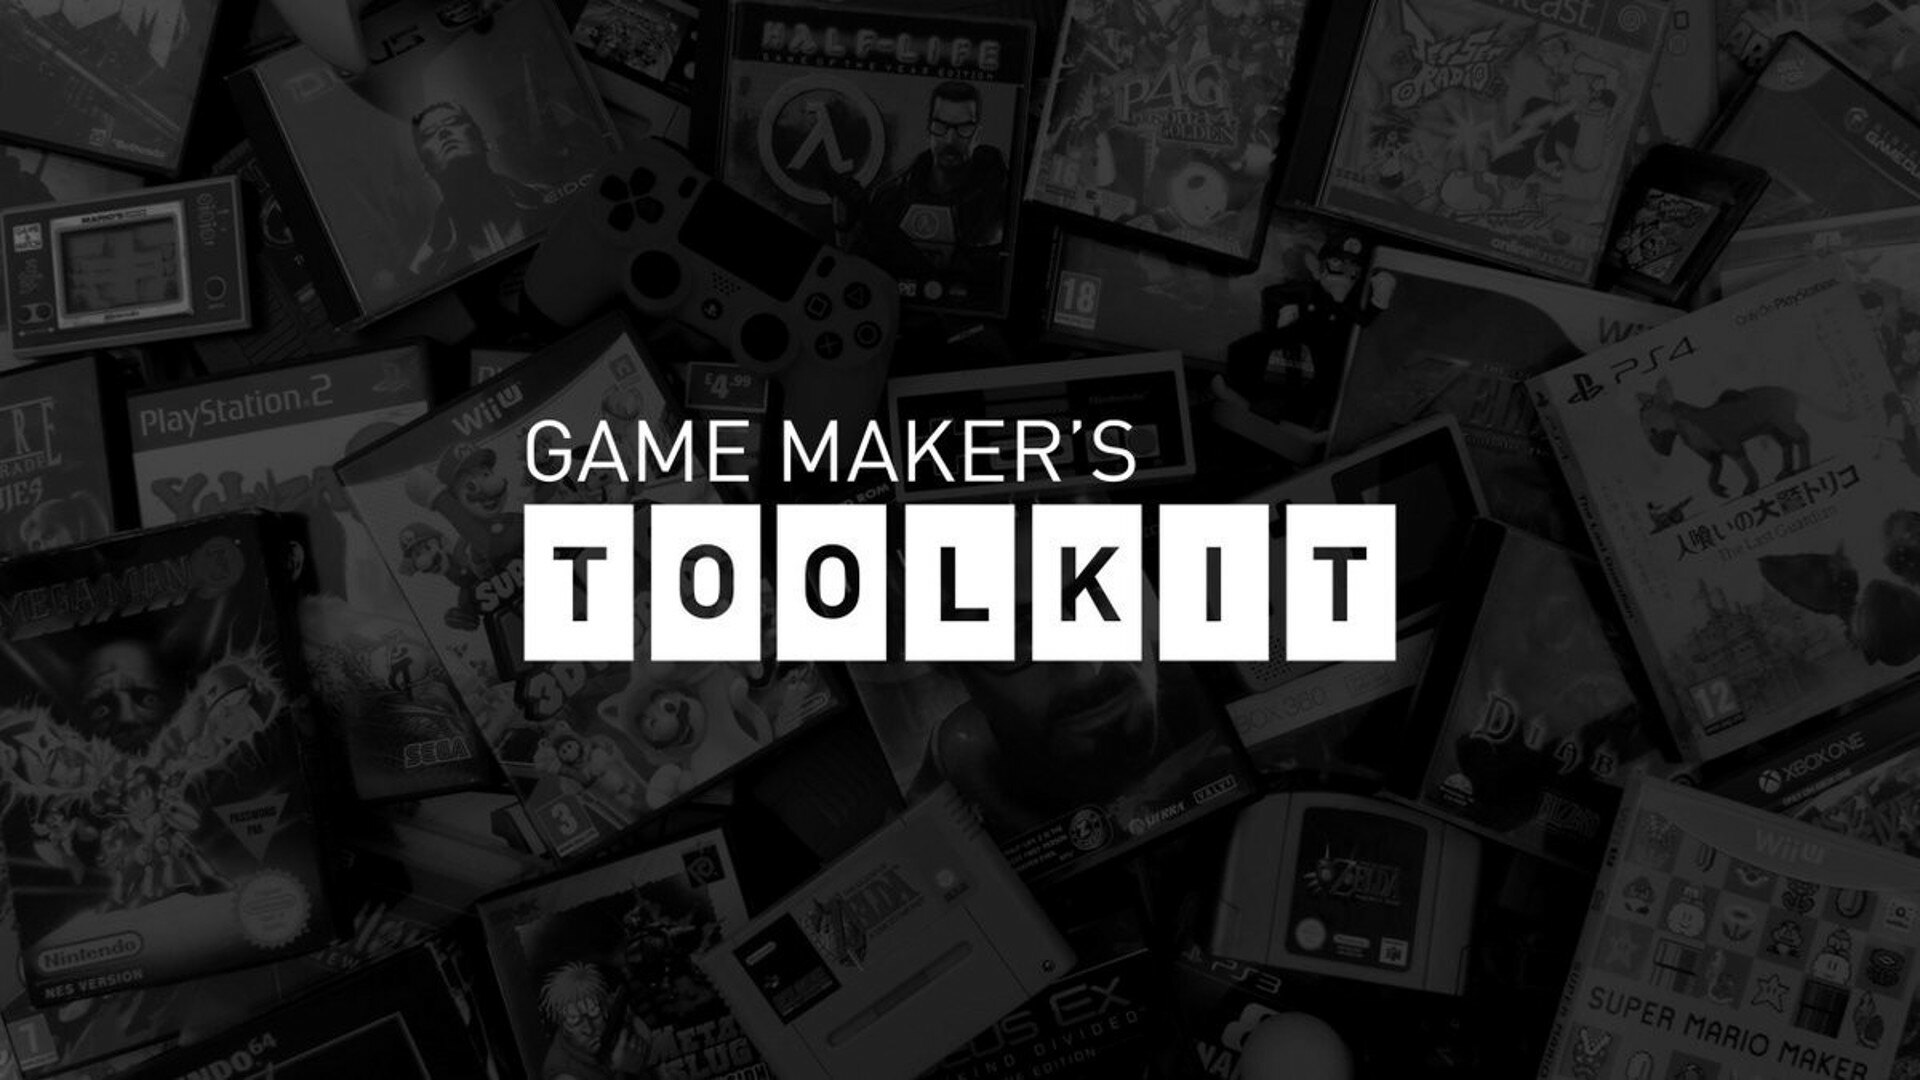 Game Maker's Toolkit countdown how many days until the next episode